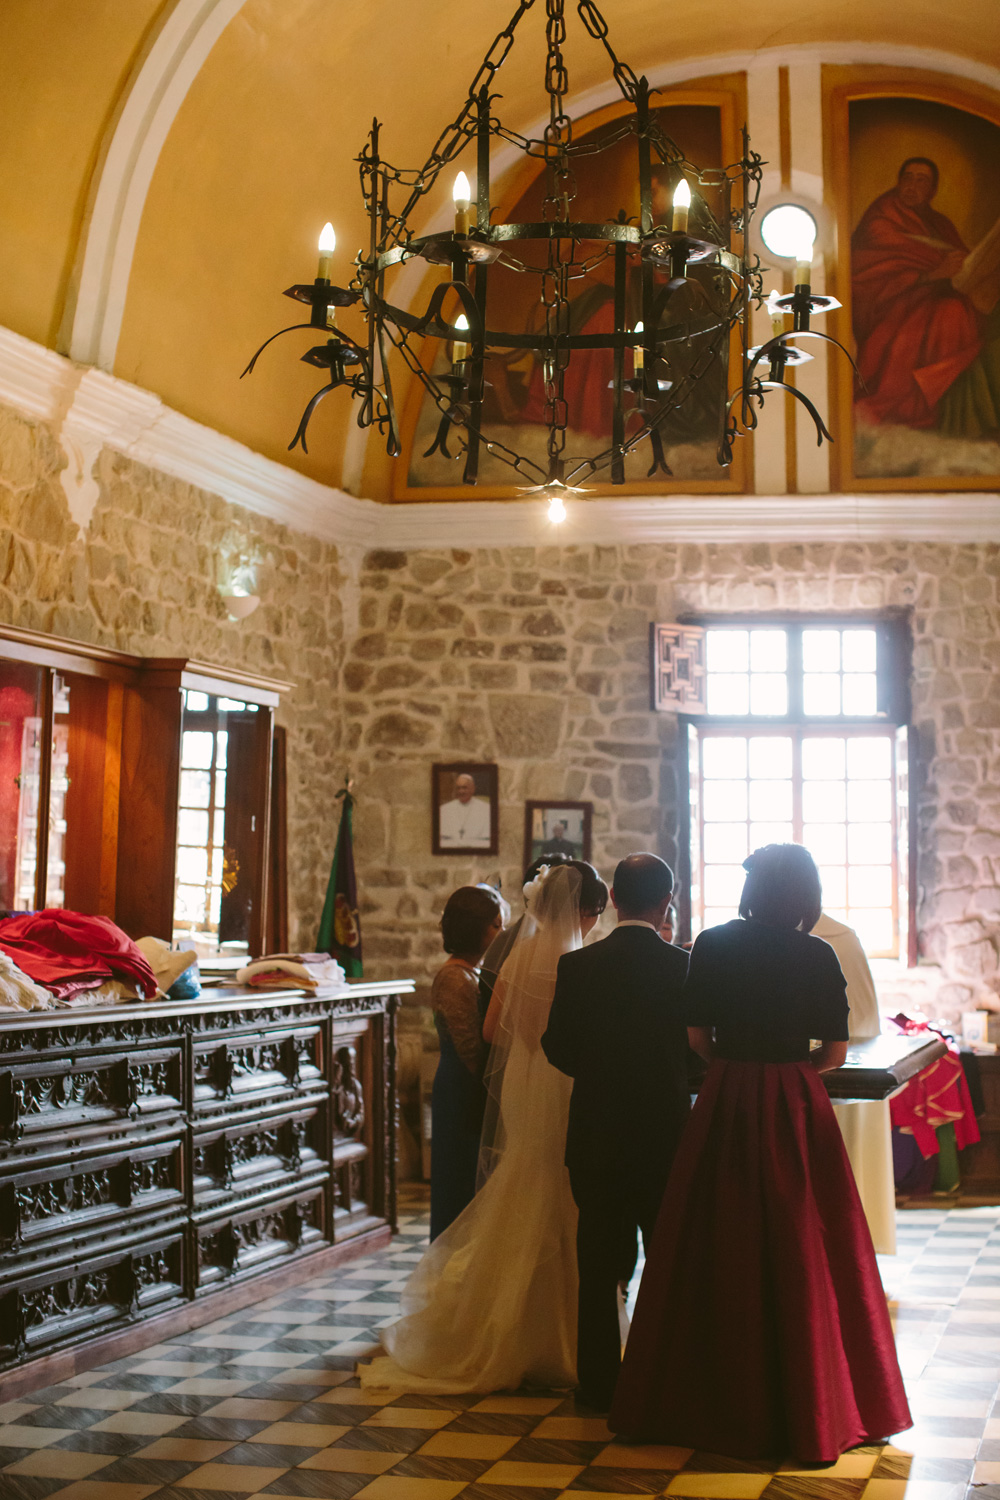 melissa_sung_photography_destination_wedding_spain_andalusia_olive_groves028.jpg